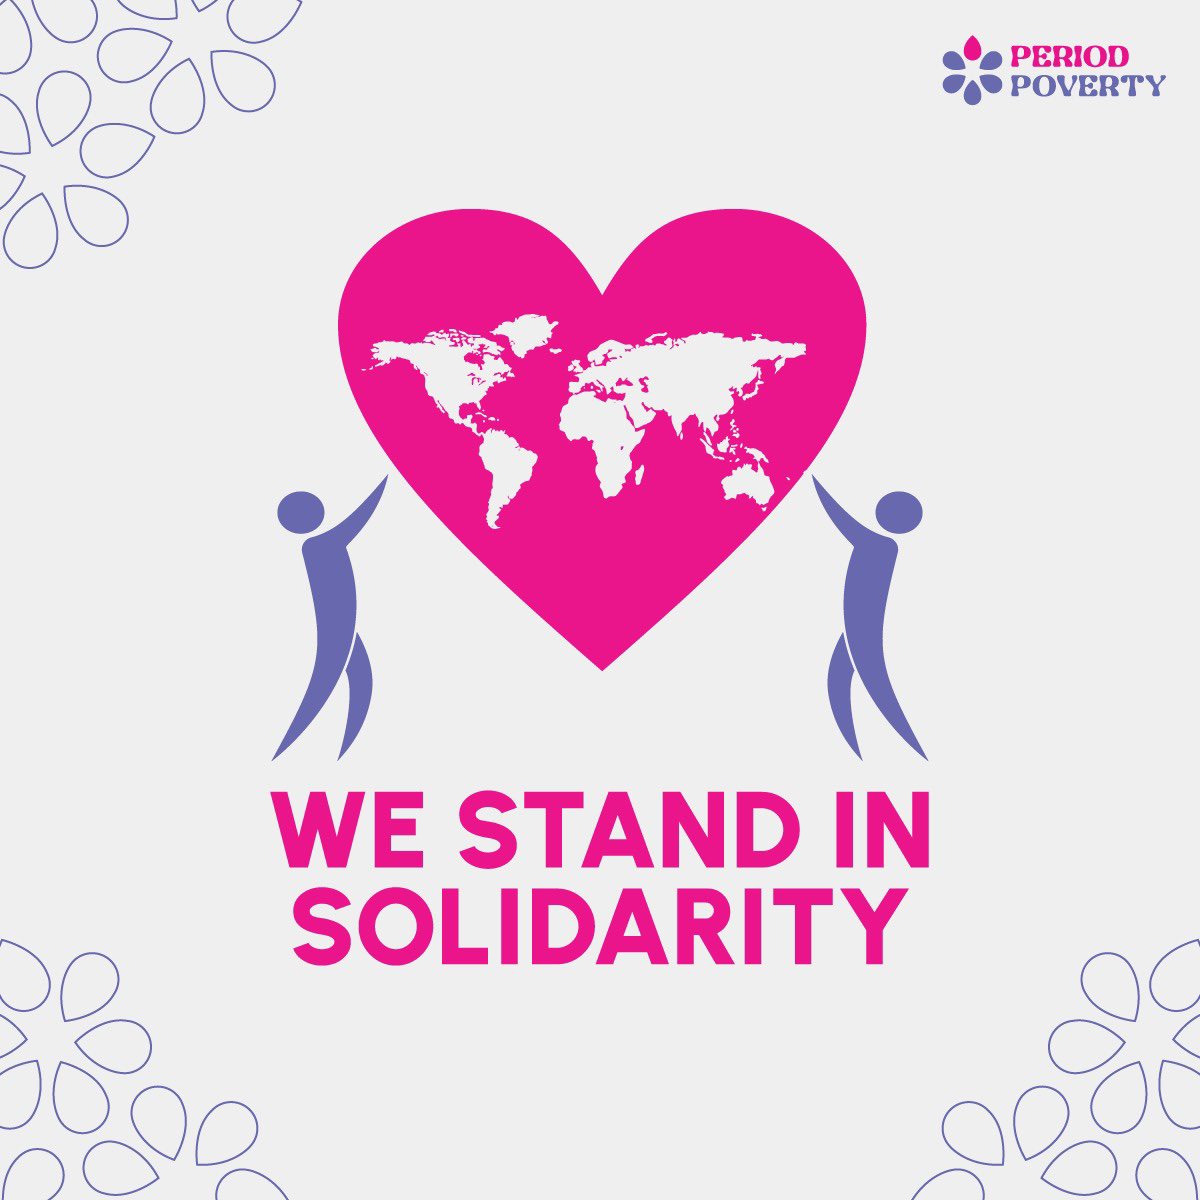 On World Humanitarian Day, join us in honoring the incredible efforts of humanitarian heroes worldwide who work tirelessly to uplift communities.
#WorldHumanitarianDay #StandInSolidarity #HumanitarianHeroes #UpliftingCommunities #PeriodPoverty #SpreadAwareness